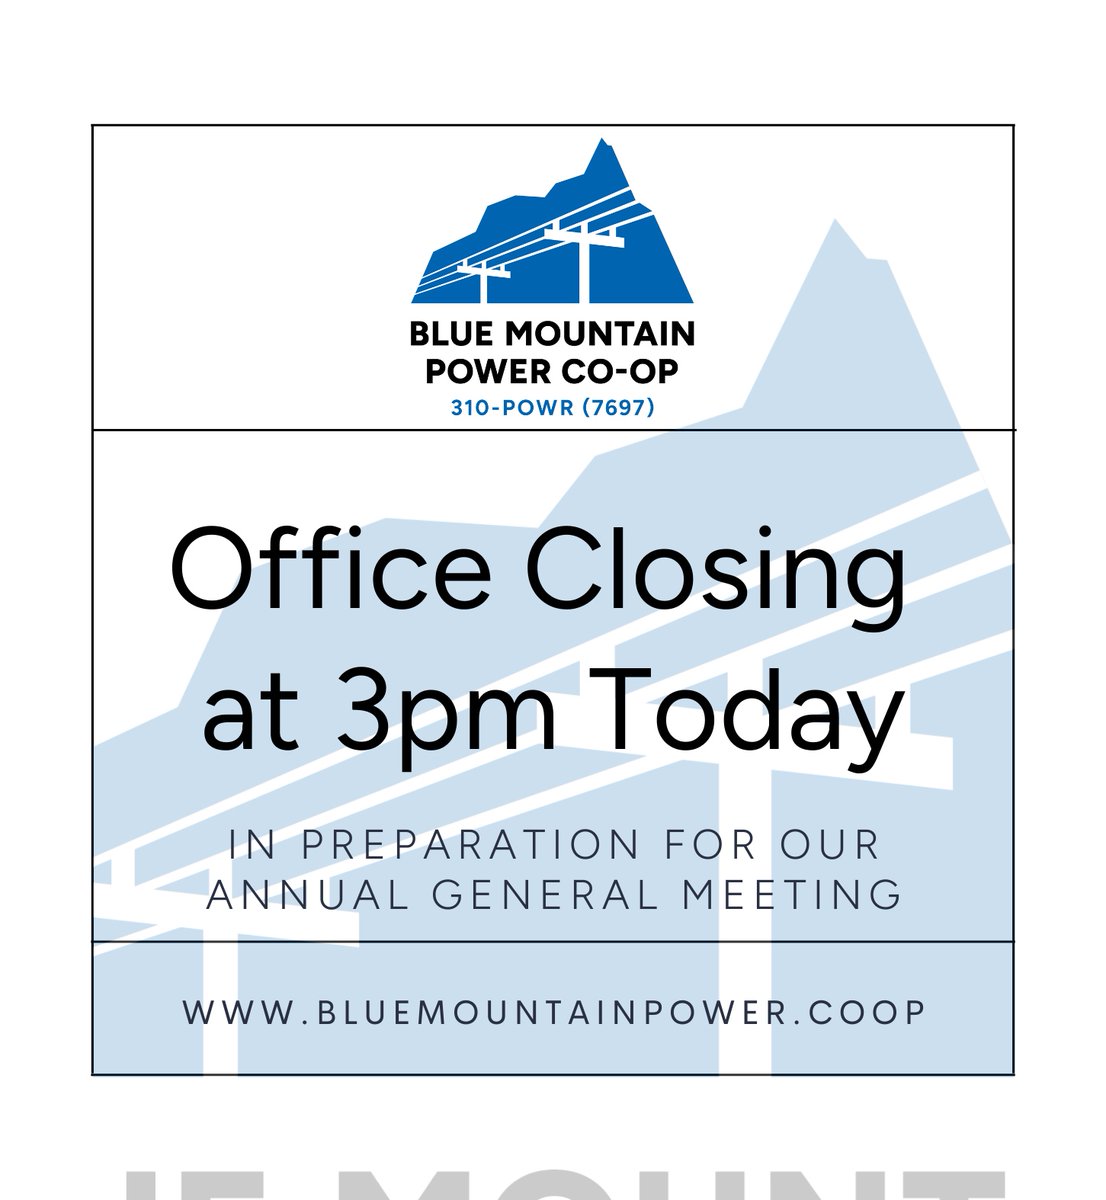 Blue Mountain Power Co-op’s office will be closed at 3:00 pm on Friday, April 12, 2024 in preparation for our Annual General Meeting. 

#BlueMountainPowerCoop #BMPower #BlueMountainPower #BMPowerCoop #BMPC #RockyMountainHouse #ClearwaterCounty